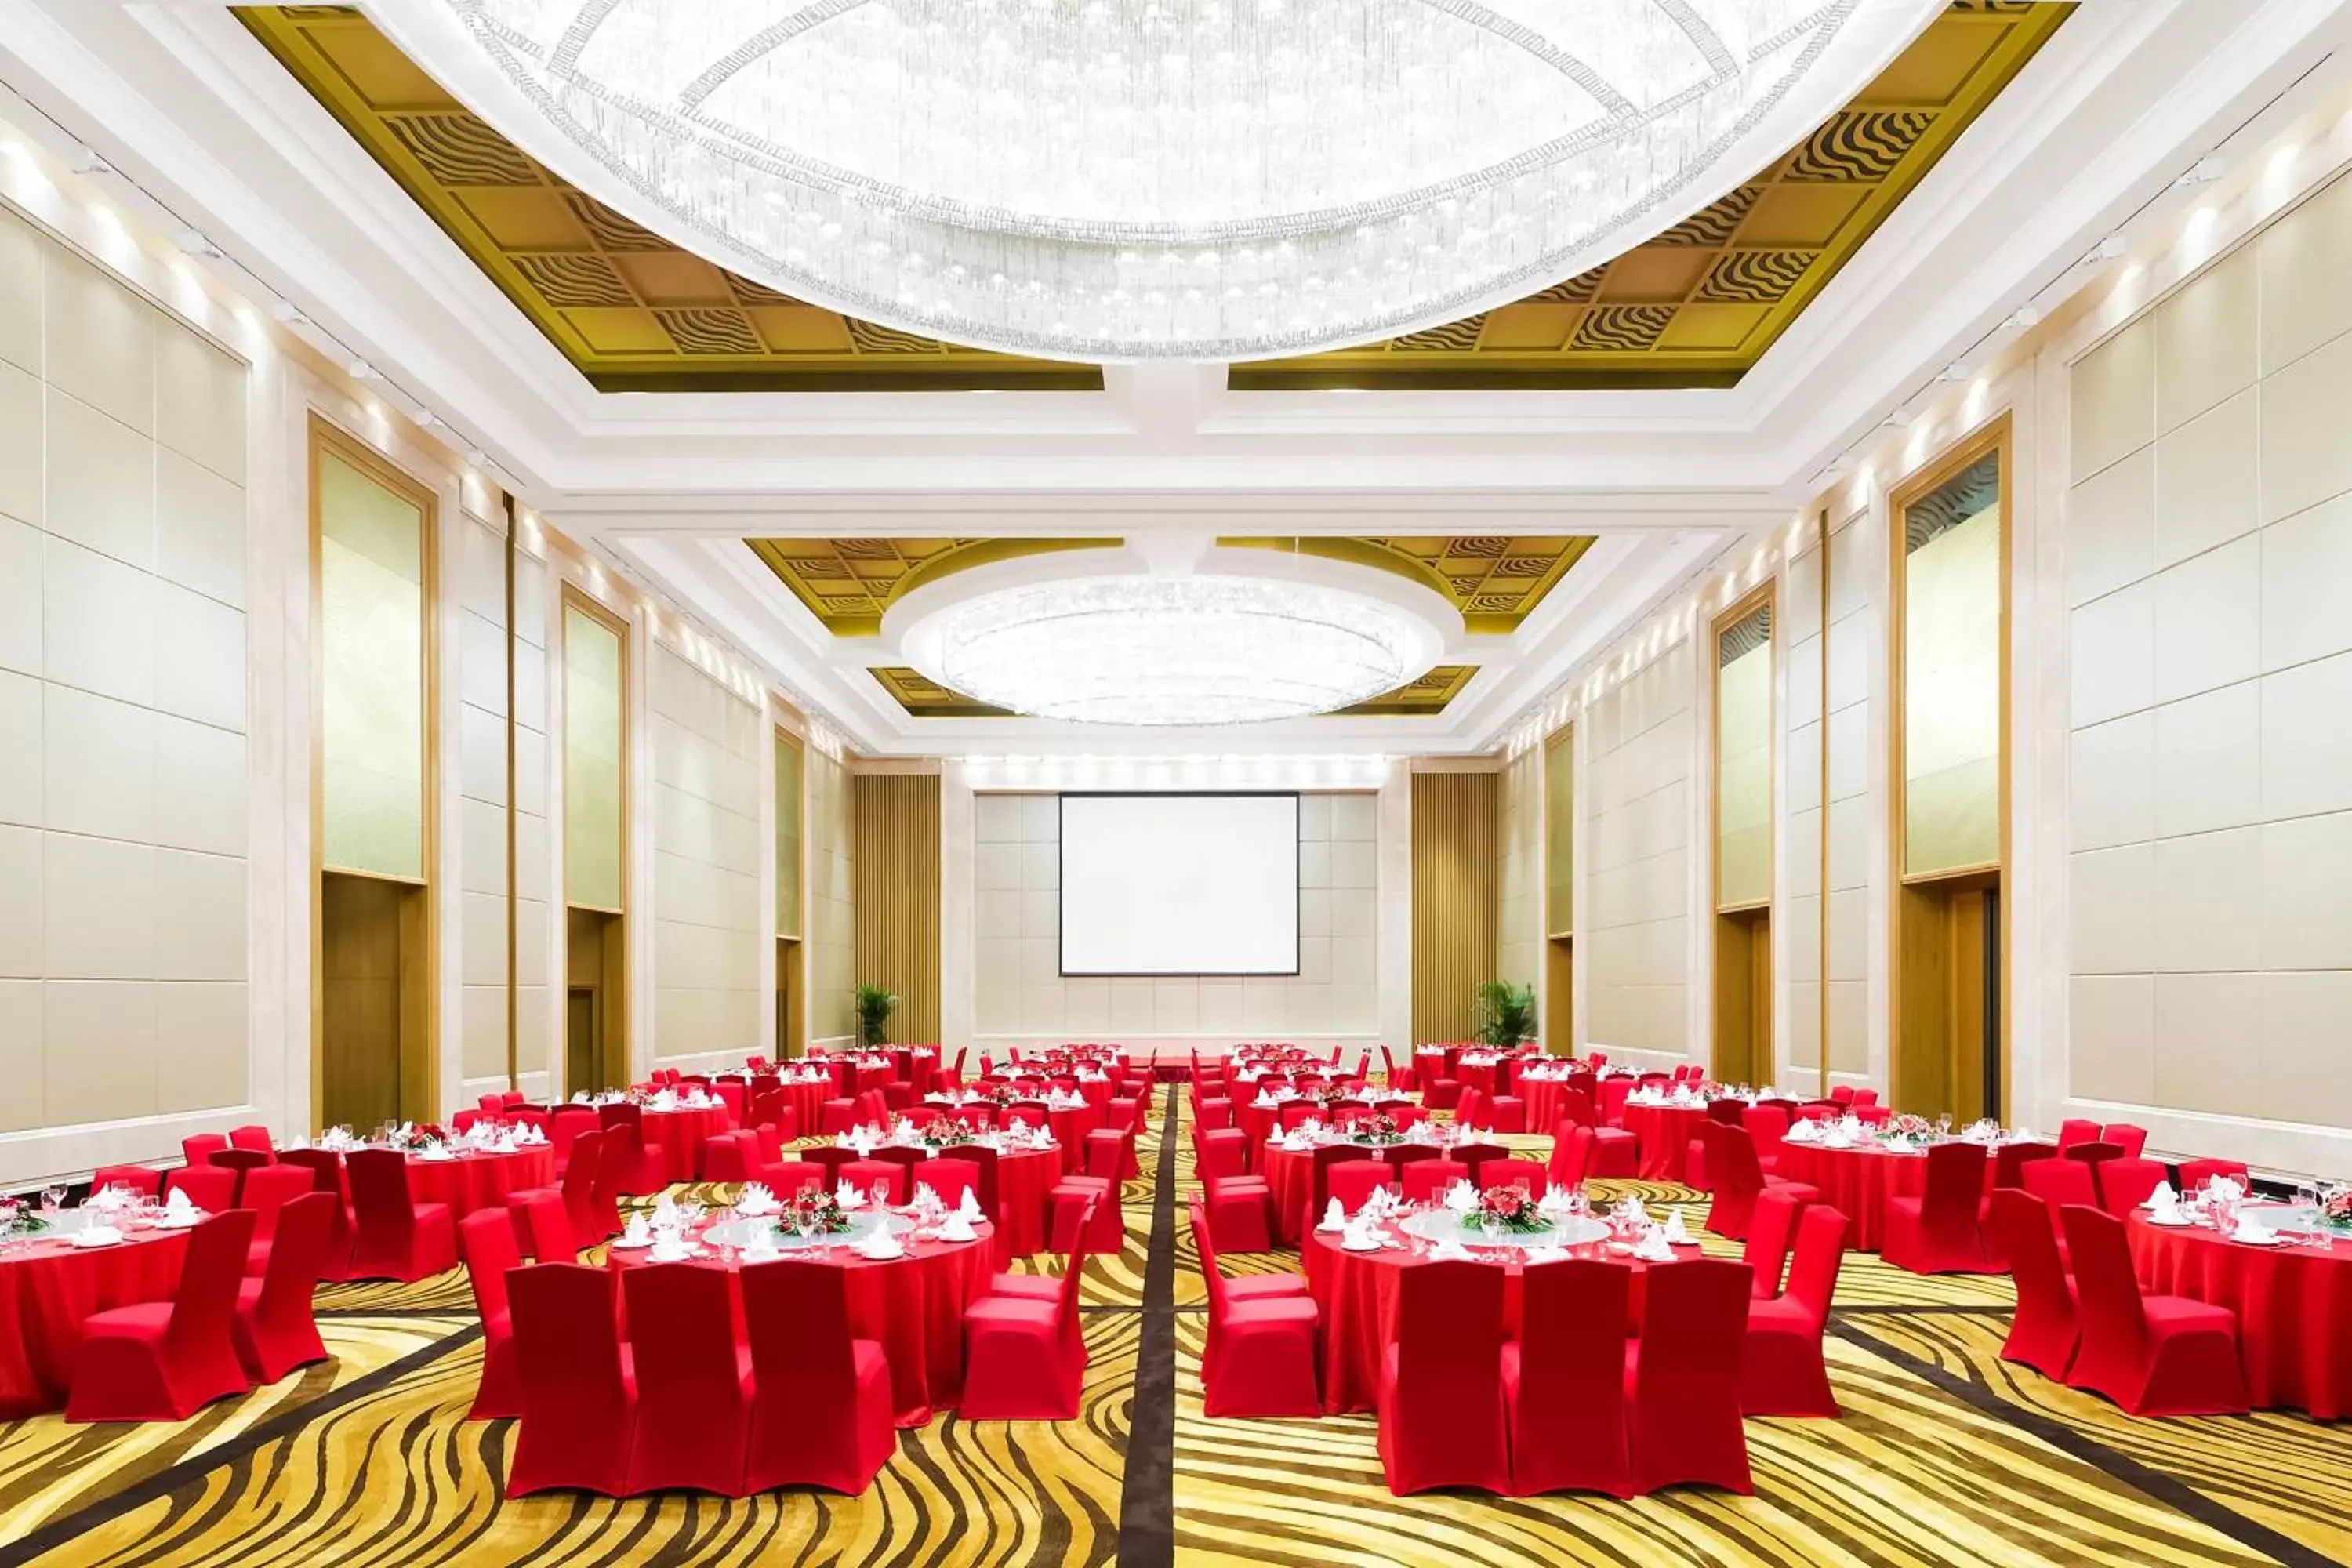 Meeting/conference room, Banquet Facilities in Four Points by Sheraton Hainan, Sanya